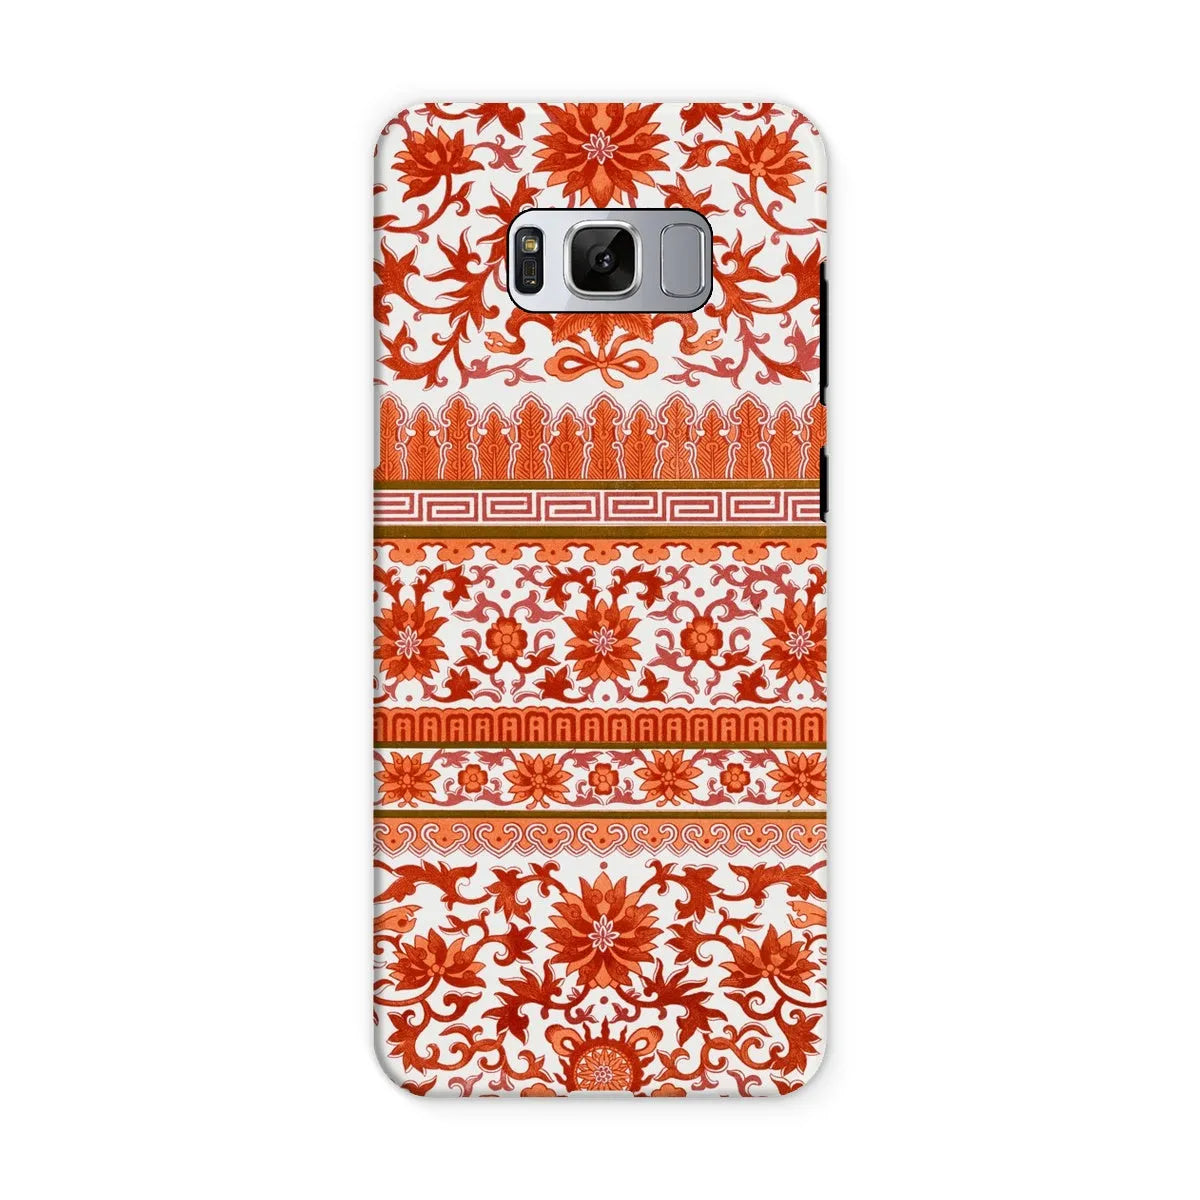 Fiery Chinese Floral Aesthetic Art Phone Case - Owen Jones - Samsung Galaxy S8 / Matte - Mobile Phone Cases - Aesthetic